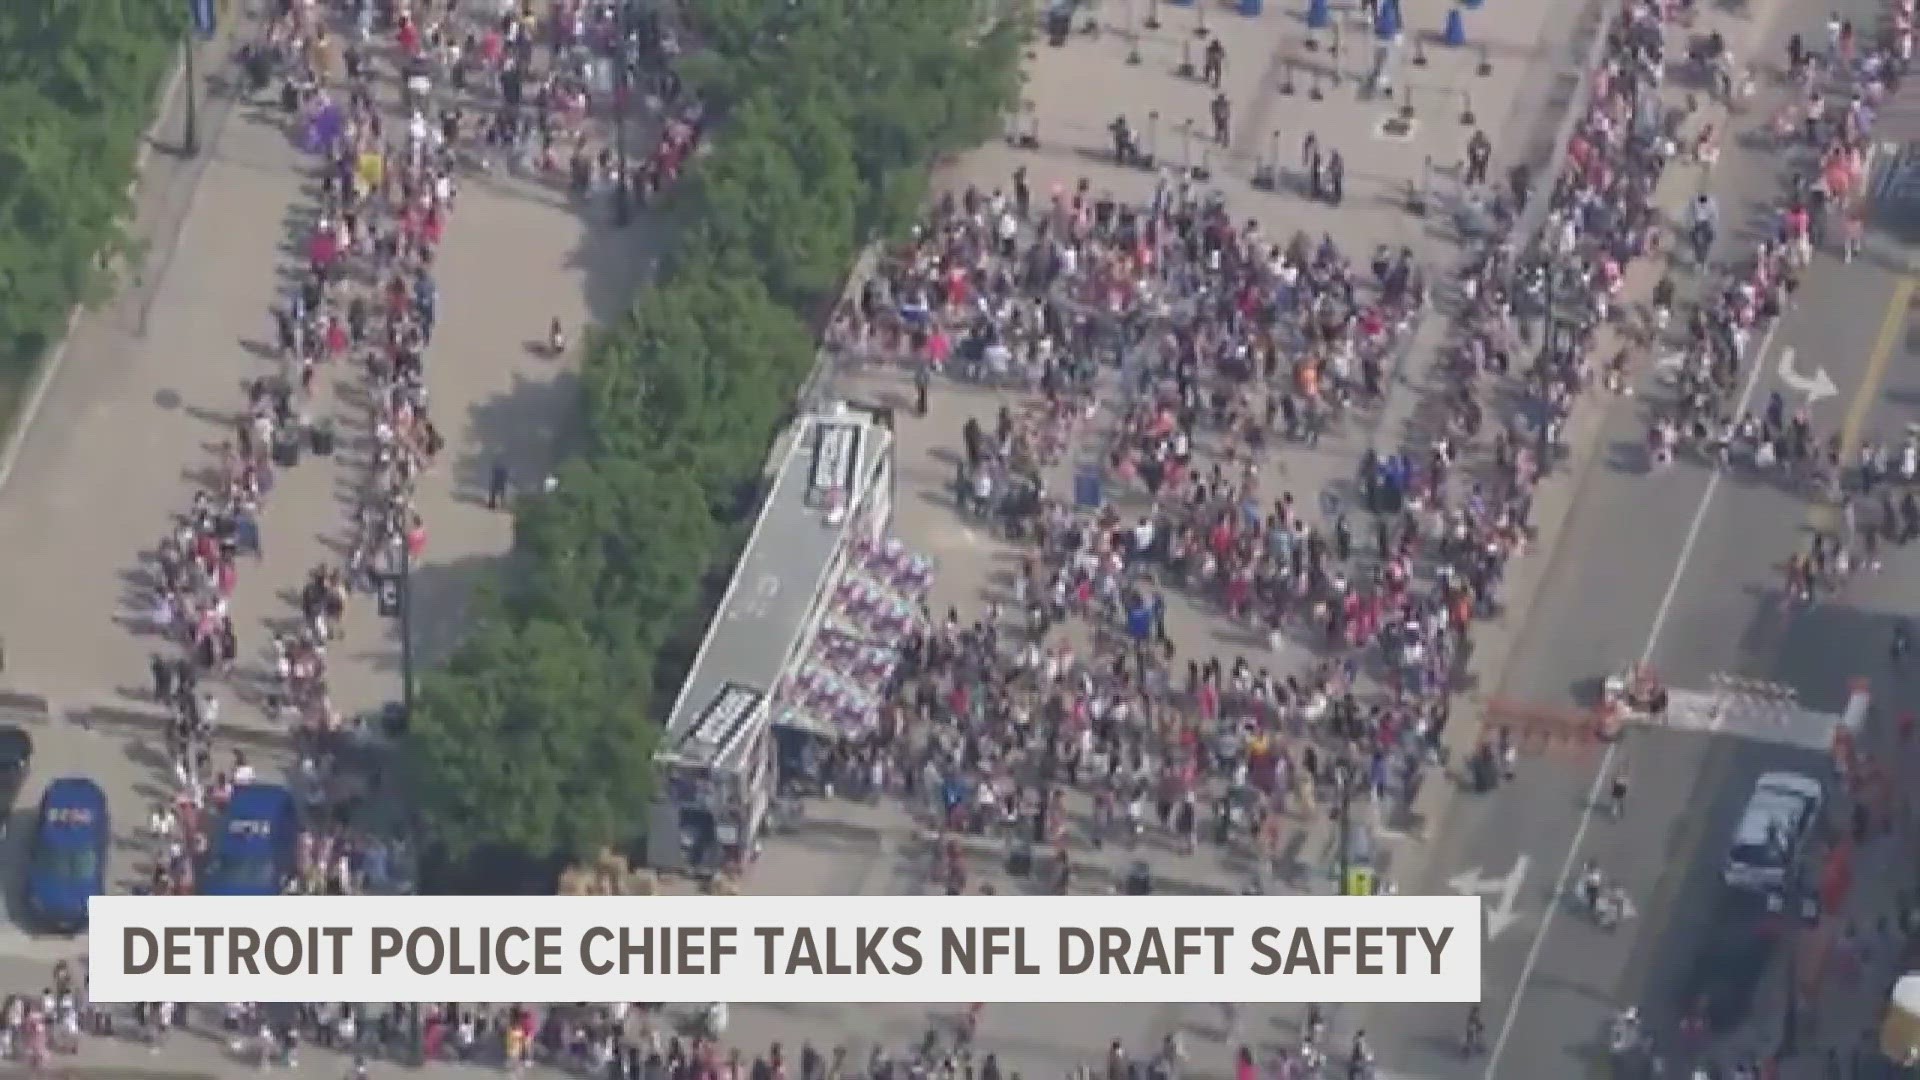 The Chief of Police talked safety ahead of the NFL draft.